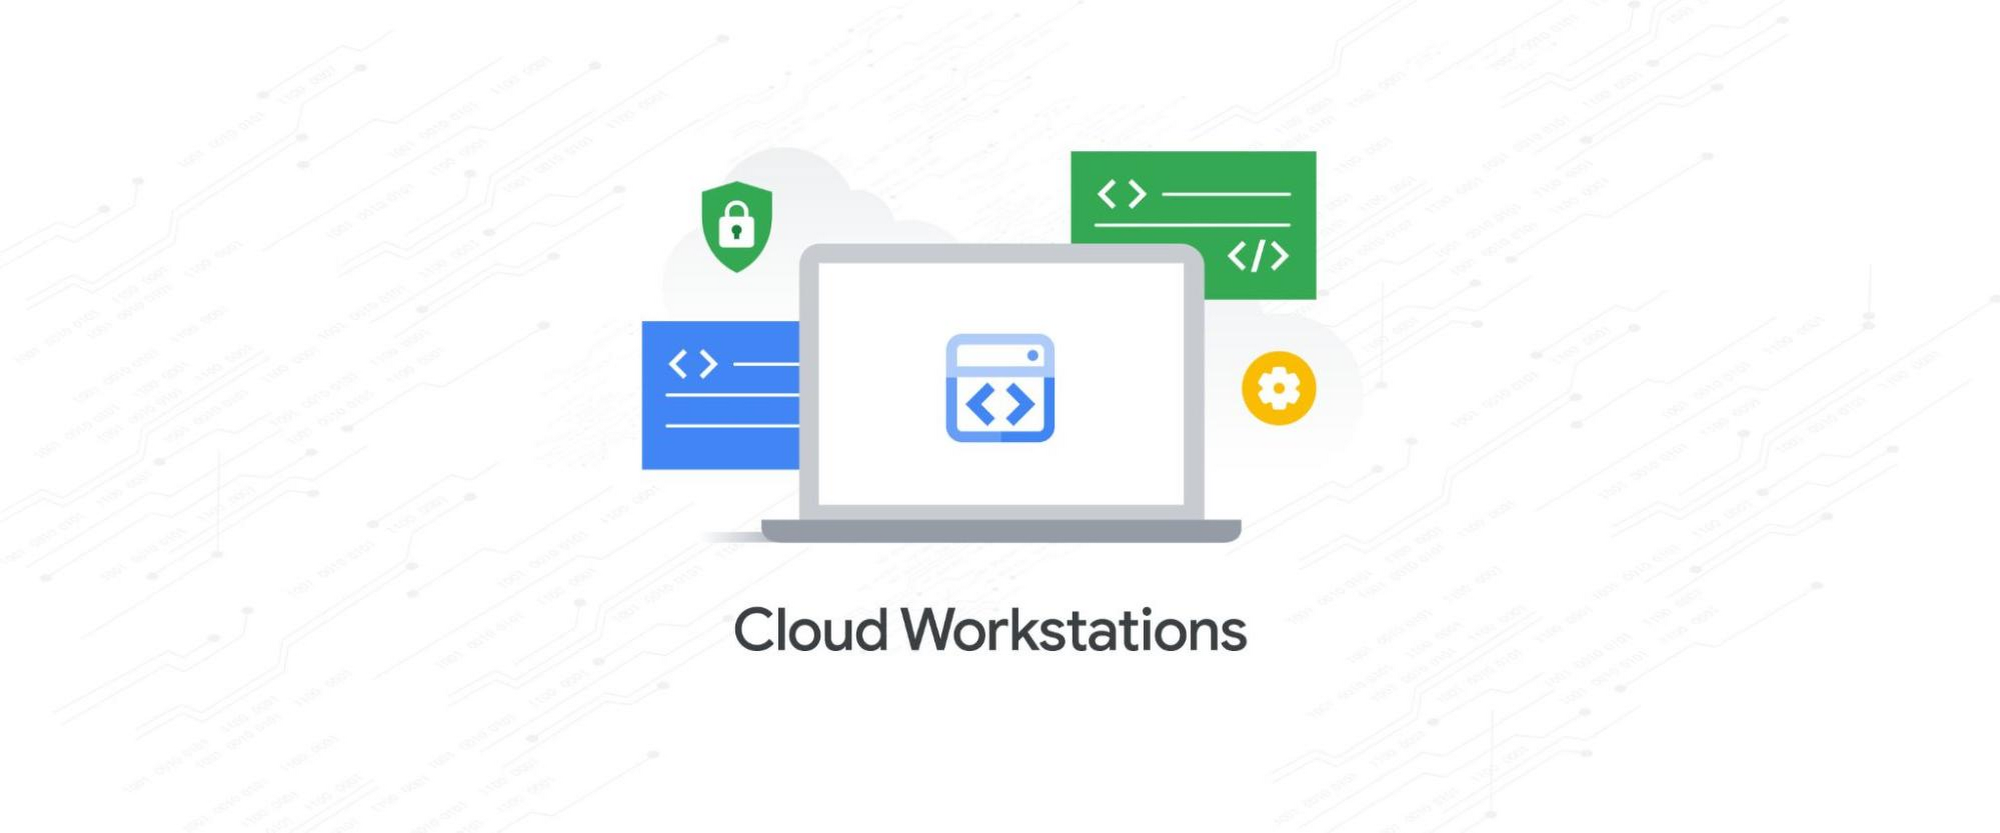 Cloud Workstations is now GA, with new capabilities and integrations